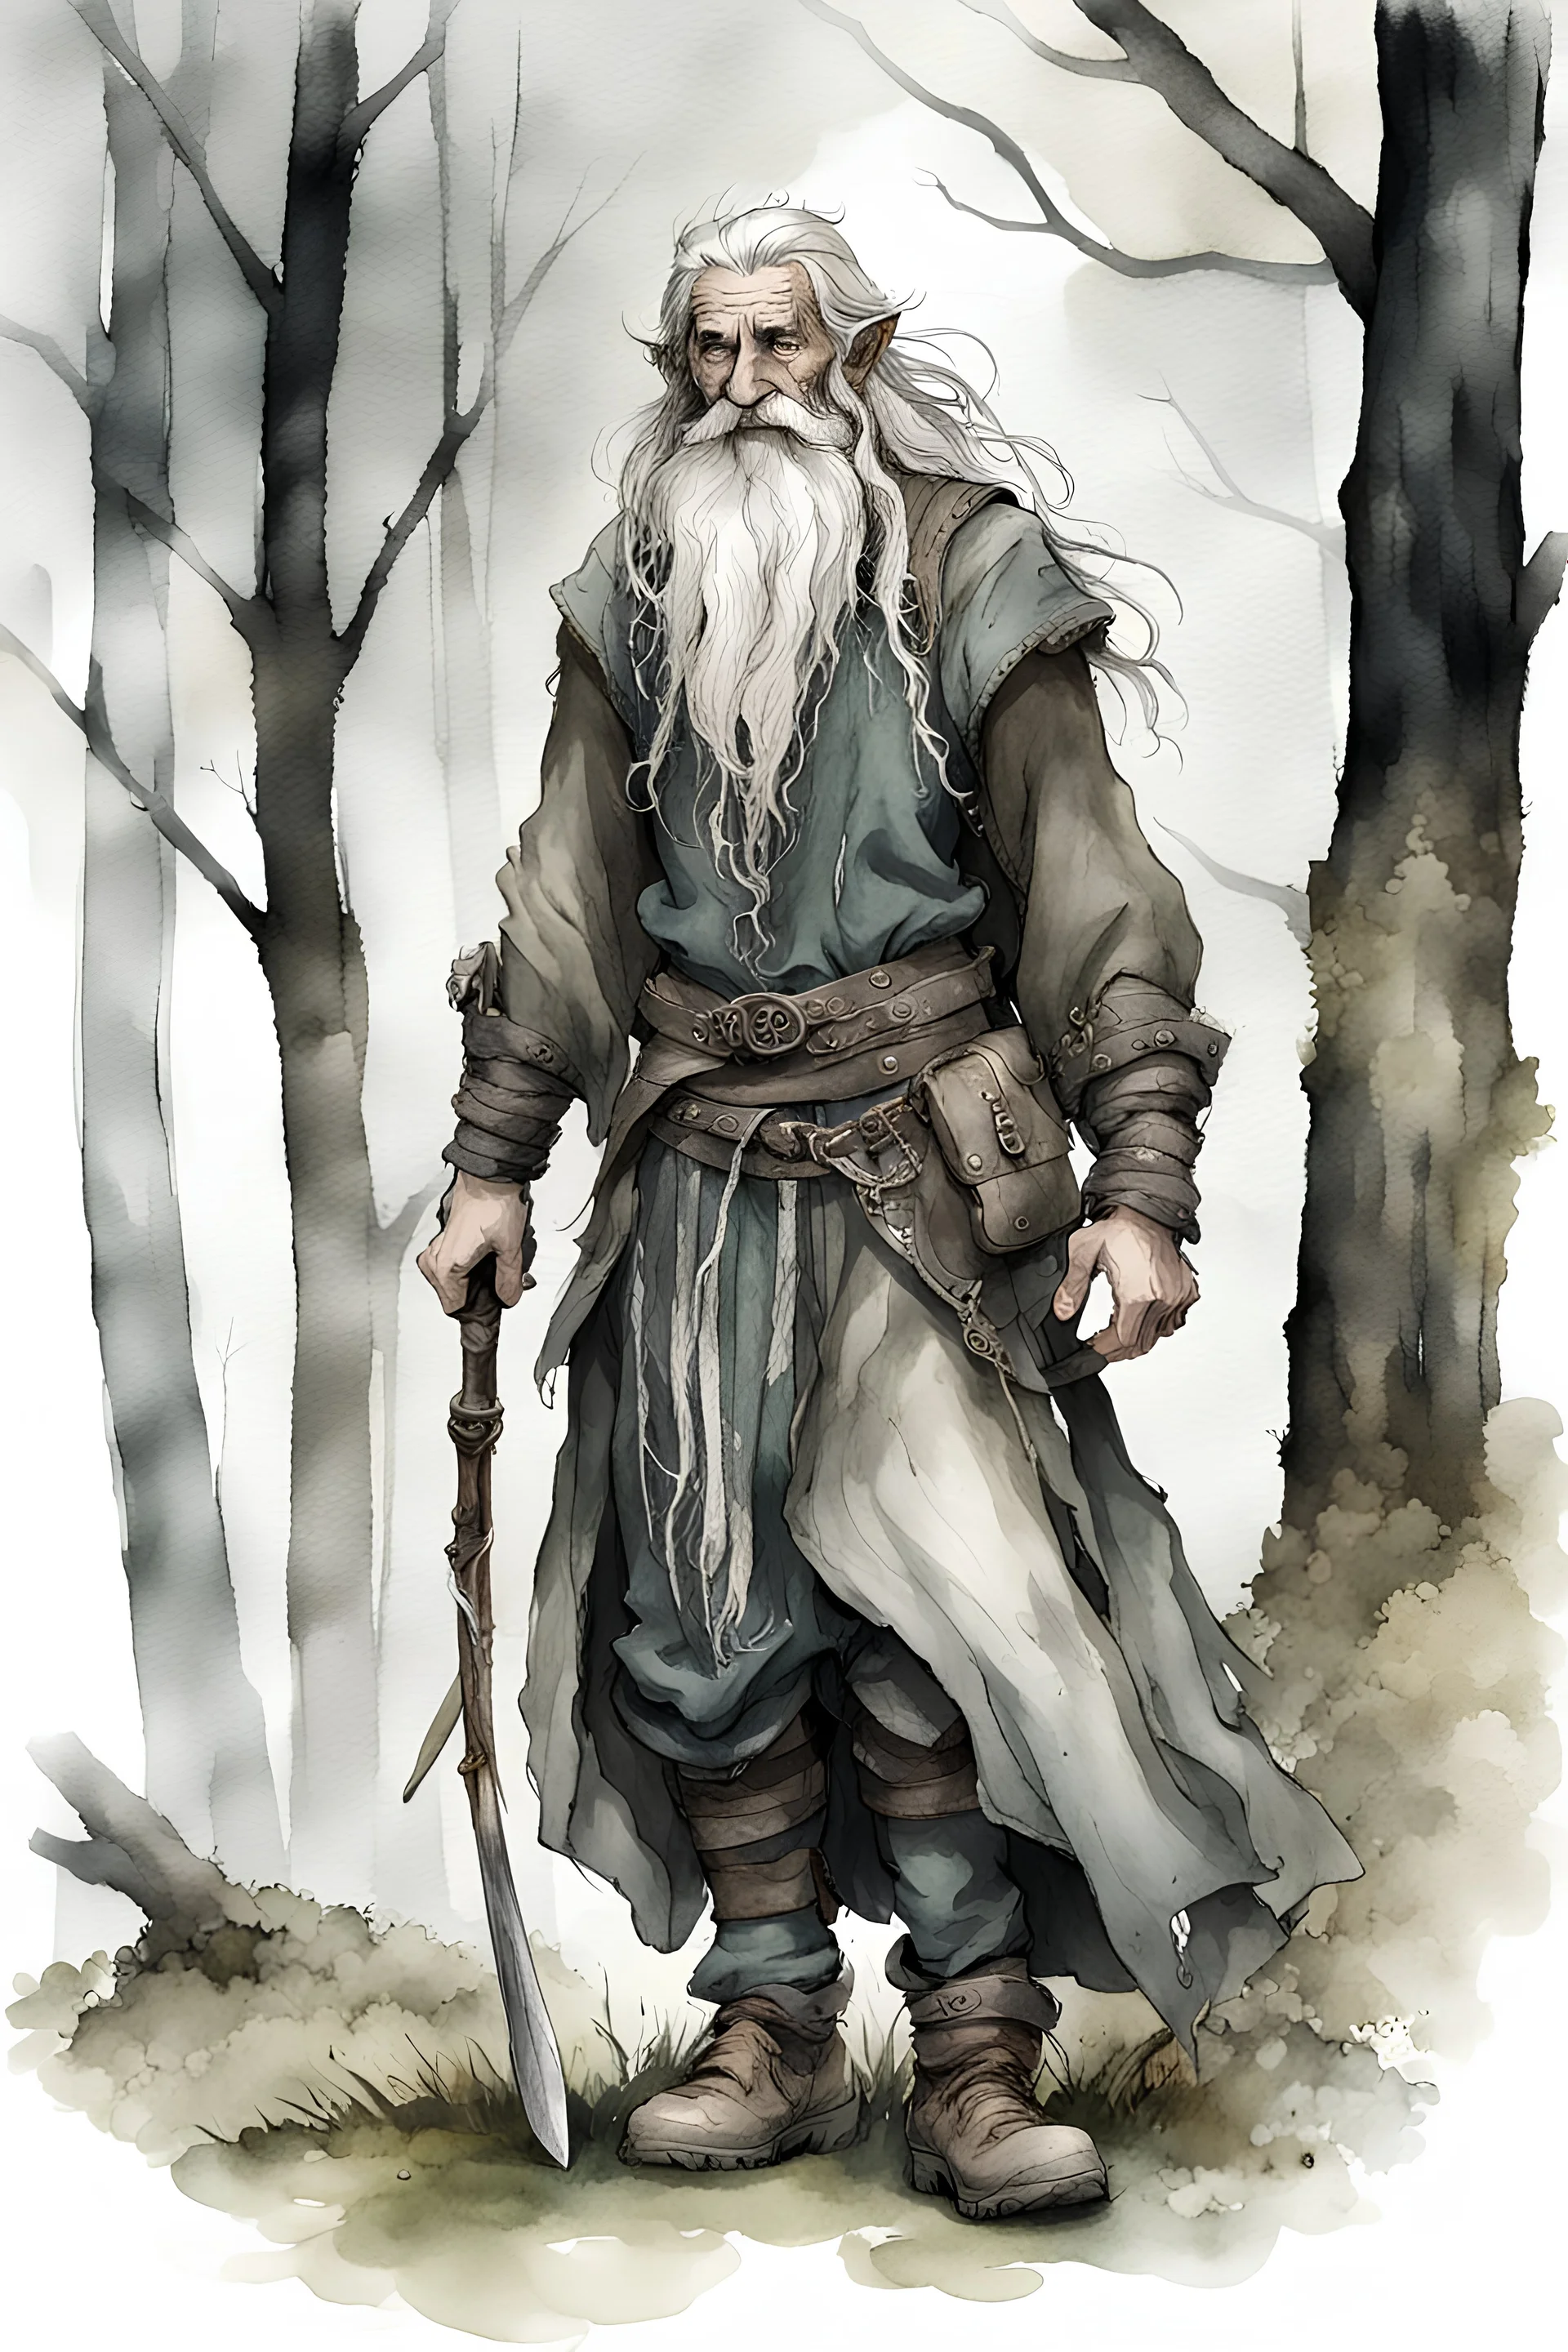 ink wash and watercolor illustration of an ancient grizzled, gnarled elf vagabond wanderer, long, grey hair streaked with black, highly detailed facial features, sharp cheekbones. His eyes are black. He wears weathered roughspun Celtic clothes, emaciated and tall, with pale skin, full body , thigh high leather boots and has a dark malevolent aura within swirling maelstrom of ethereal chaos in the comic book style of Bill Sienkiewicz and Jean Giraud Moebius , realistic dramatic natural lighting